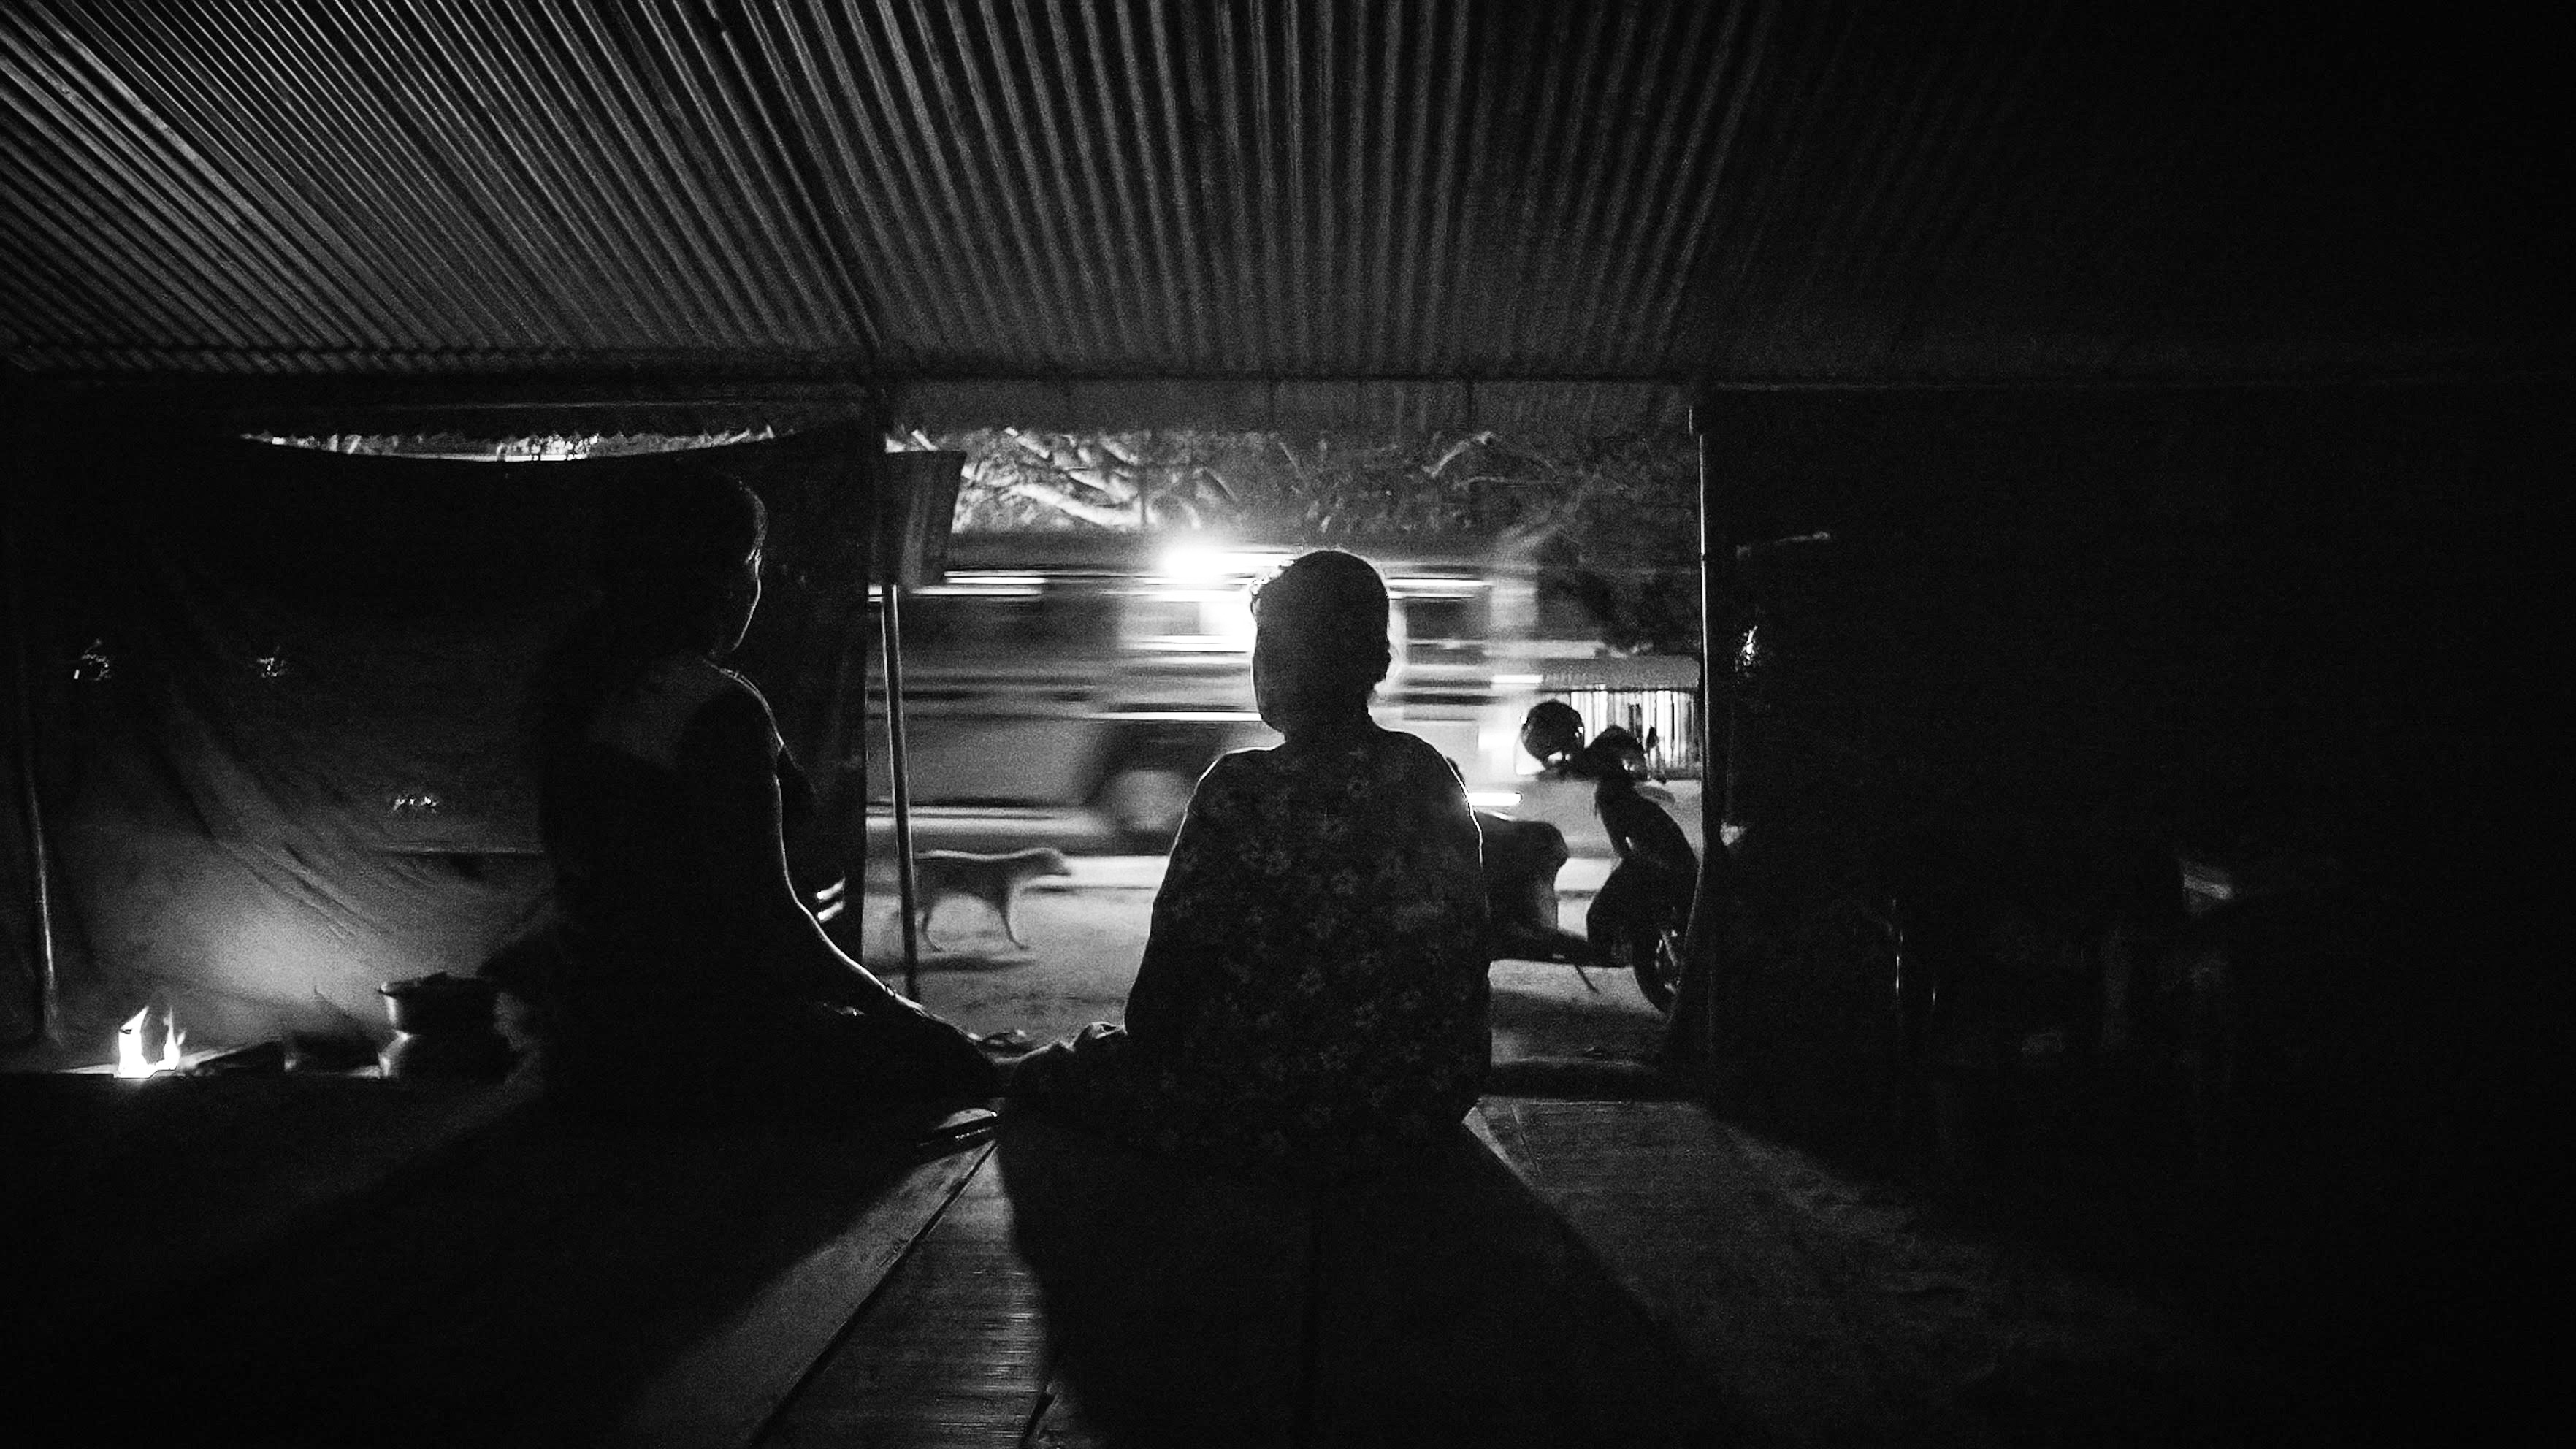 Women sitting in dark shed with bus passing